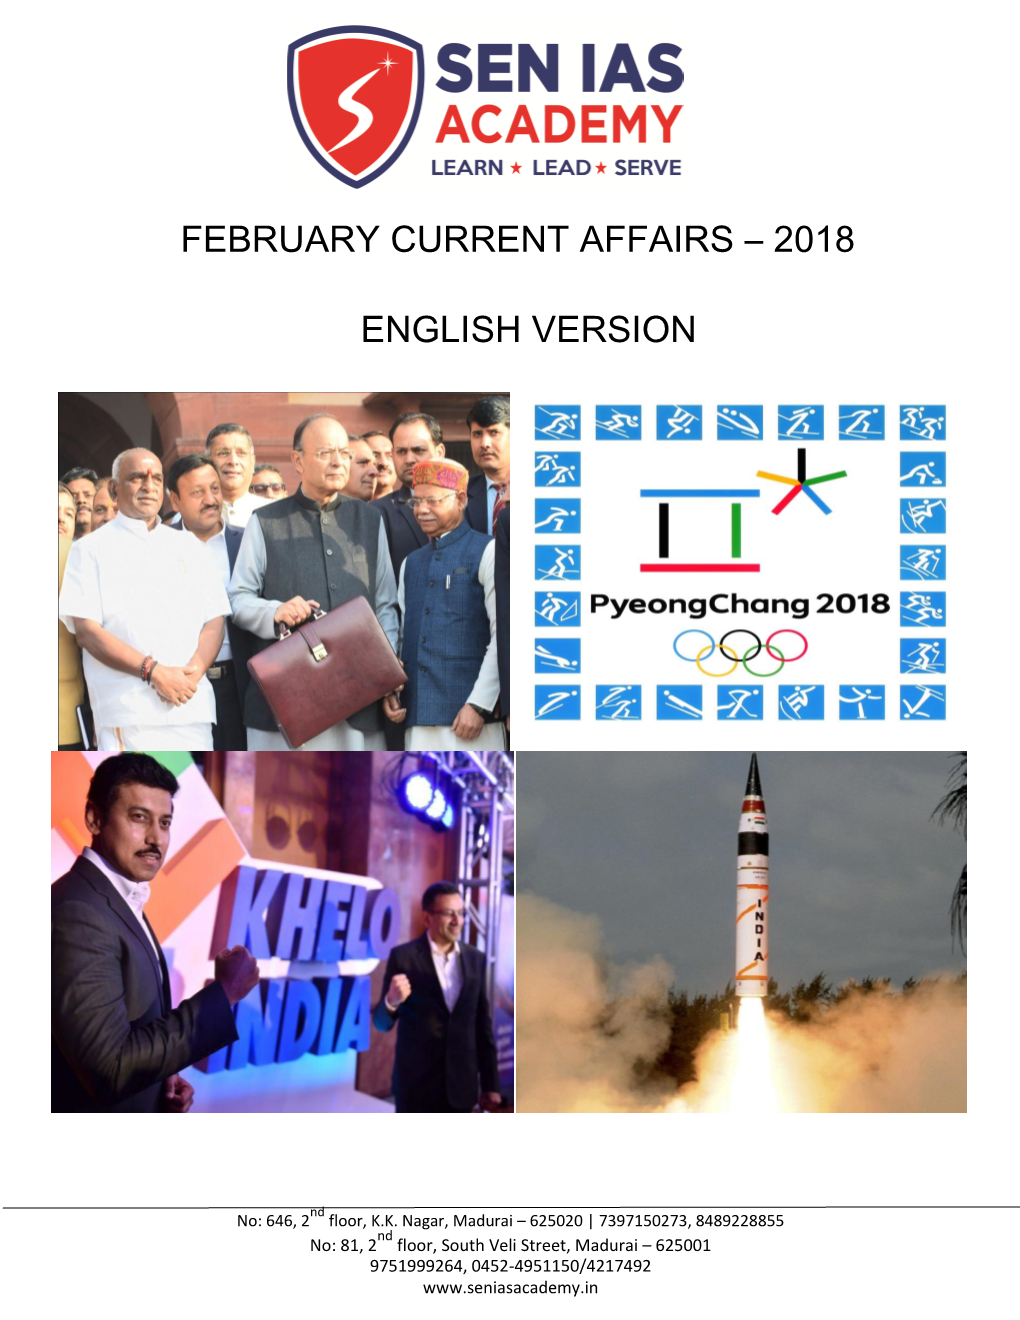 February Current Affairs – 2018 English Version